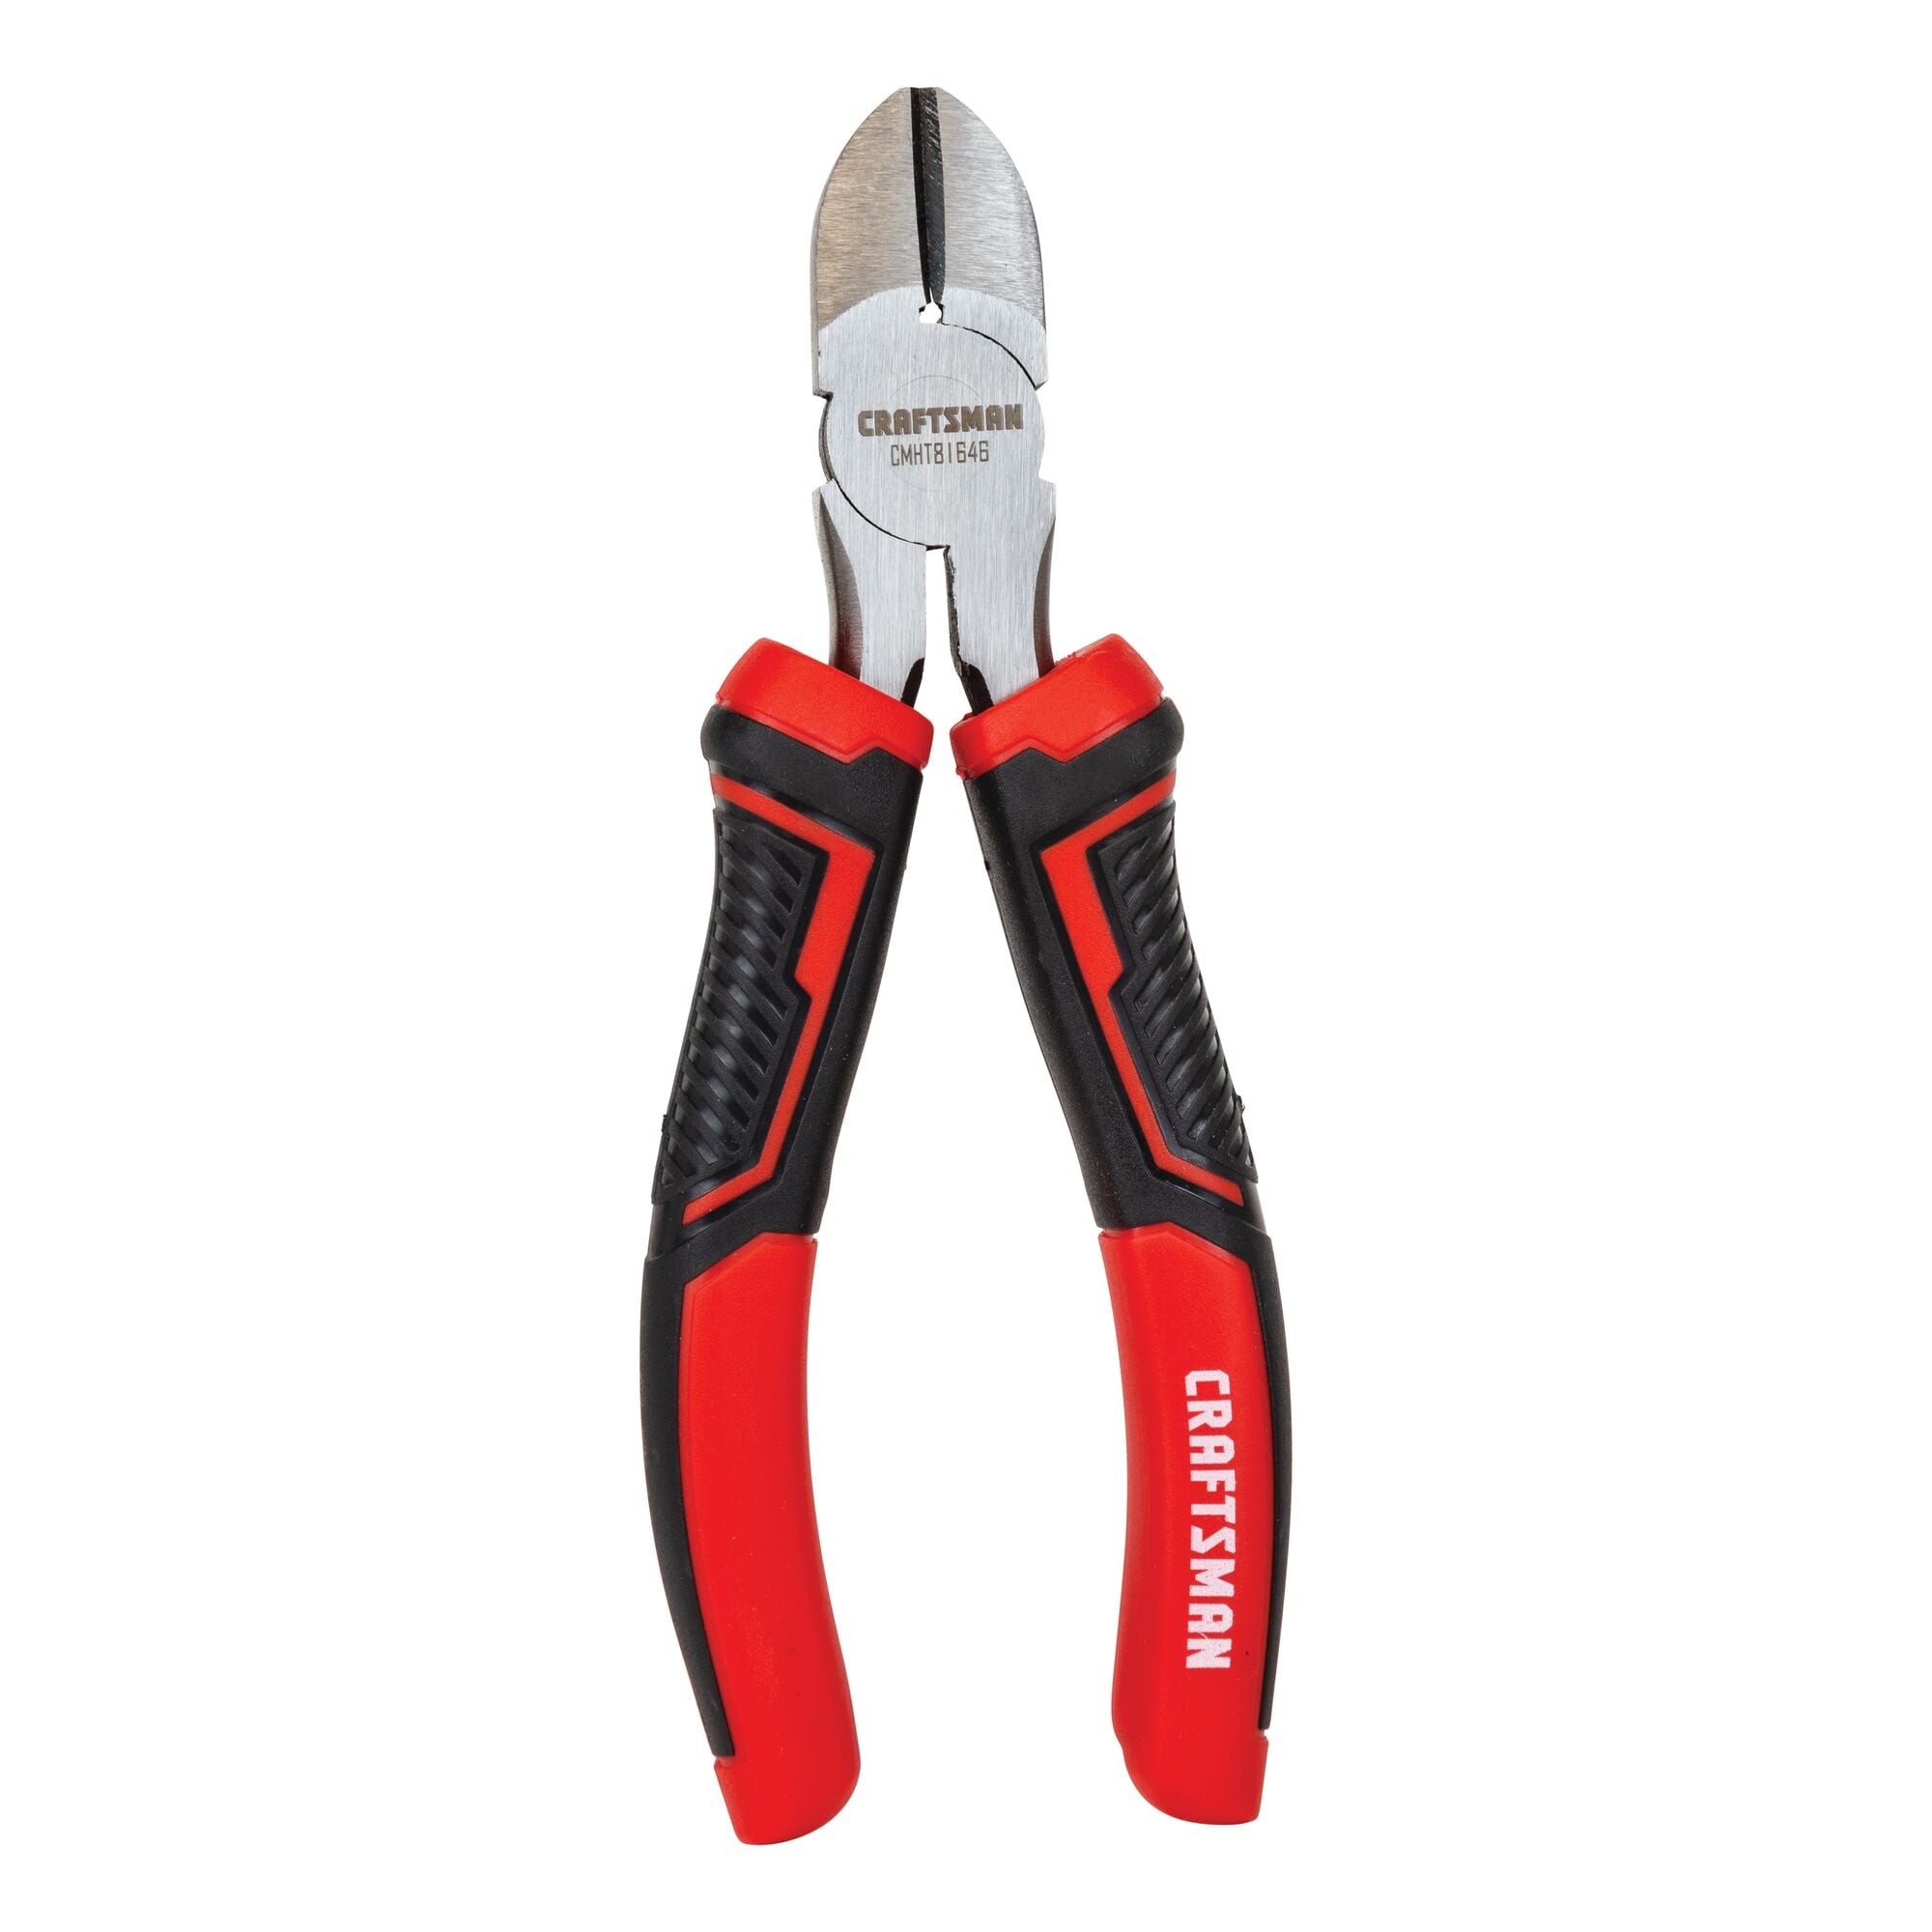 1Pc Diagonal Pliers Electrical Wire Cable Cutters Cutting Side Snips